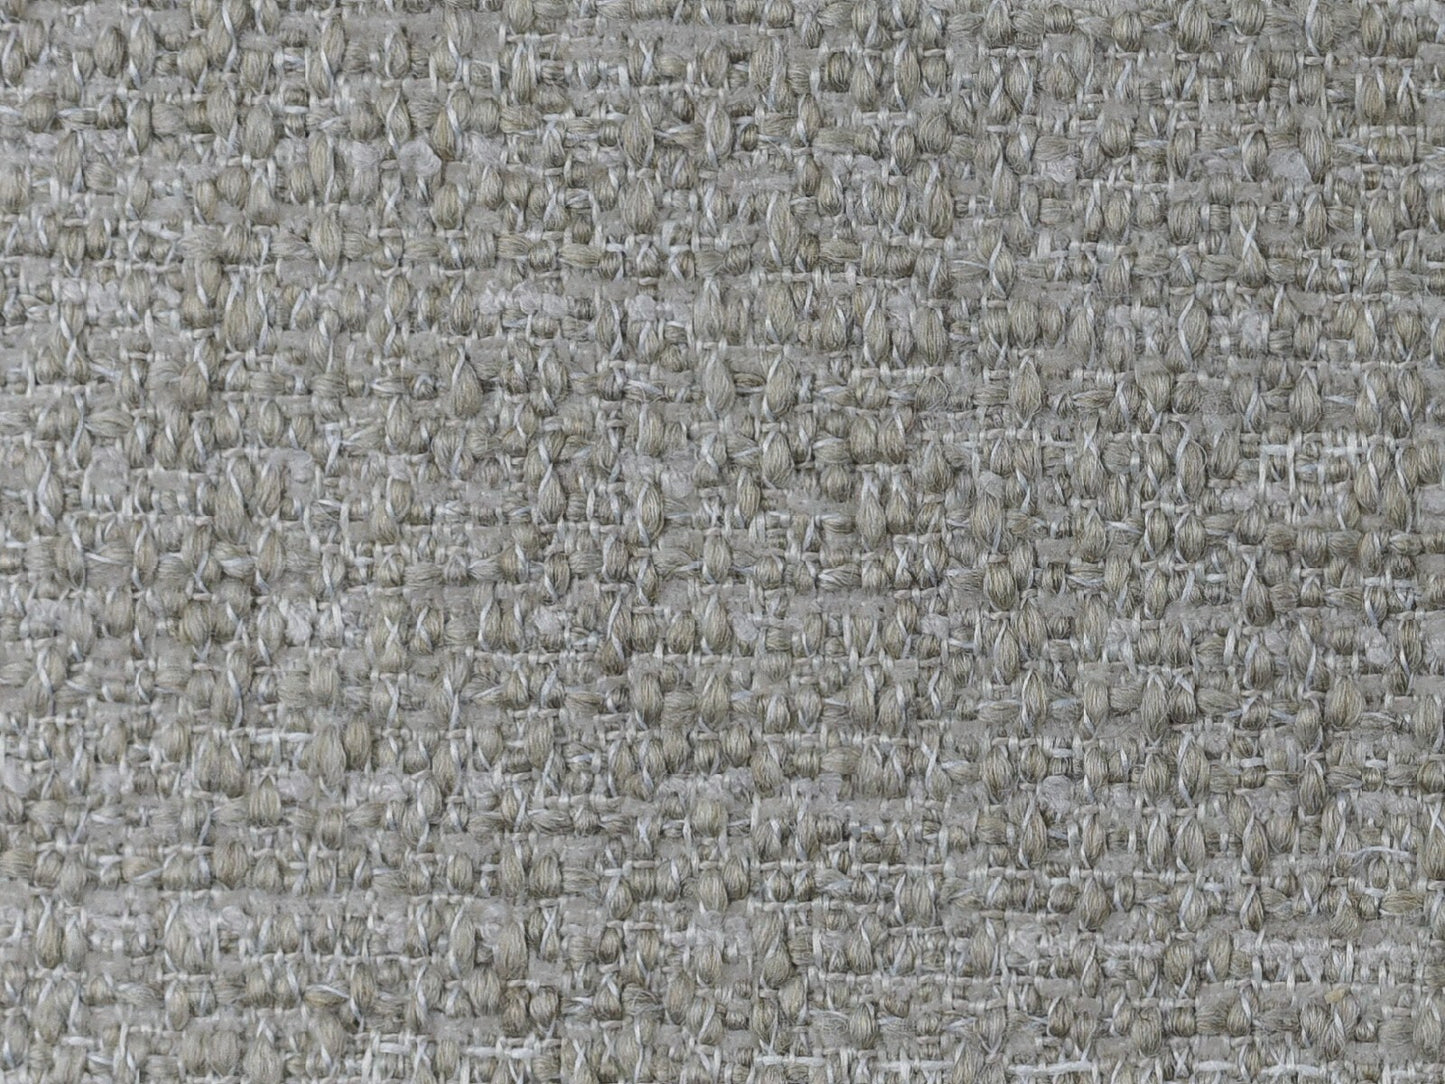 Contemporary Coarse Woven Textured Upholstery Fabric By The Yard 57"W/600GSM-Capability Cobblestone